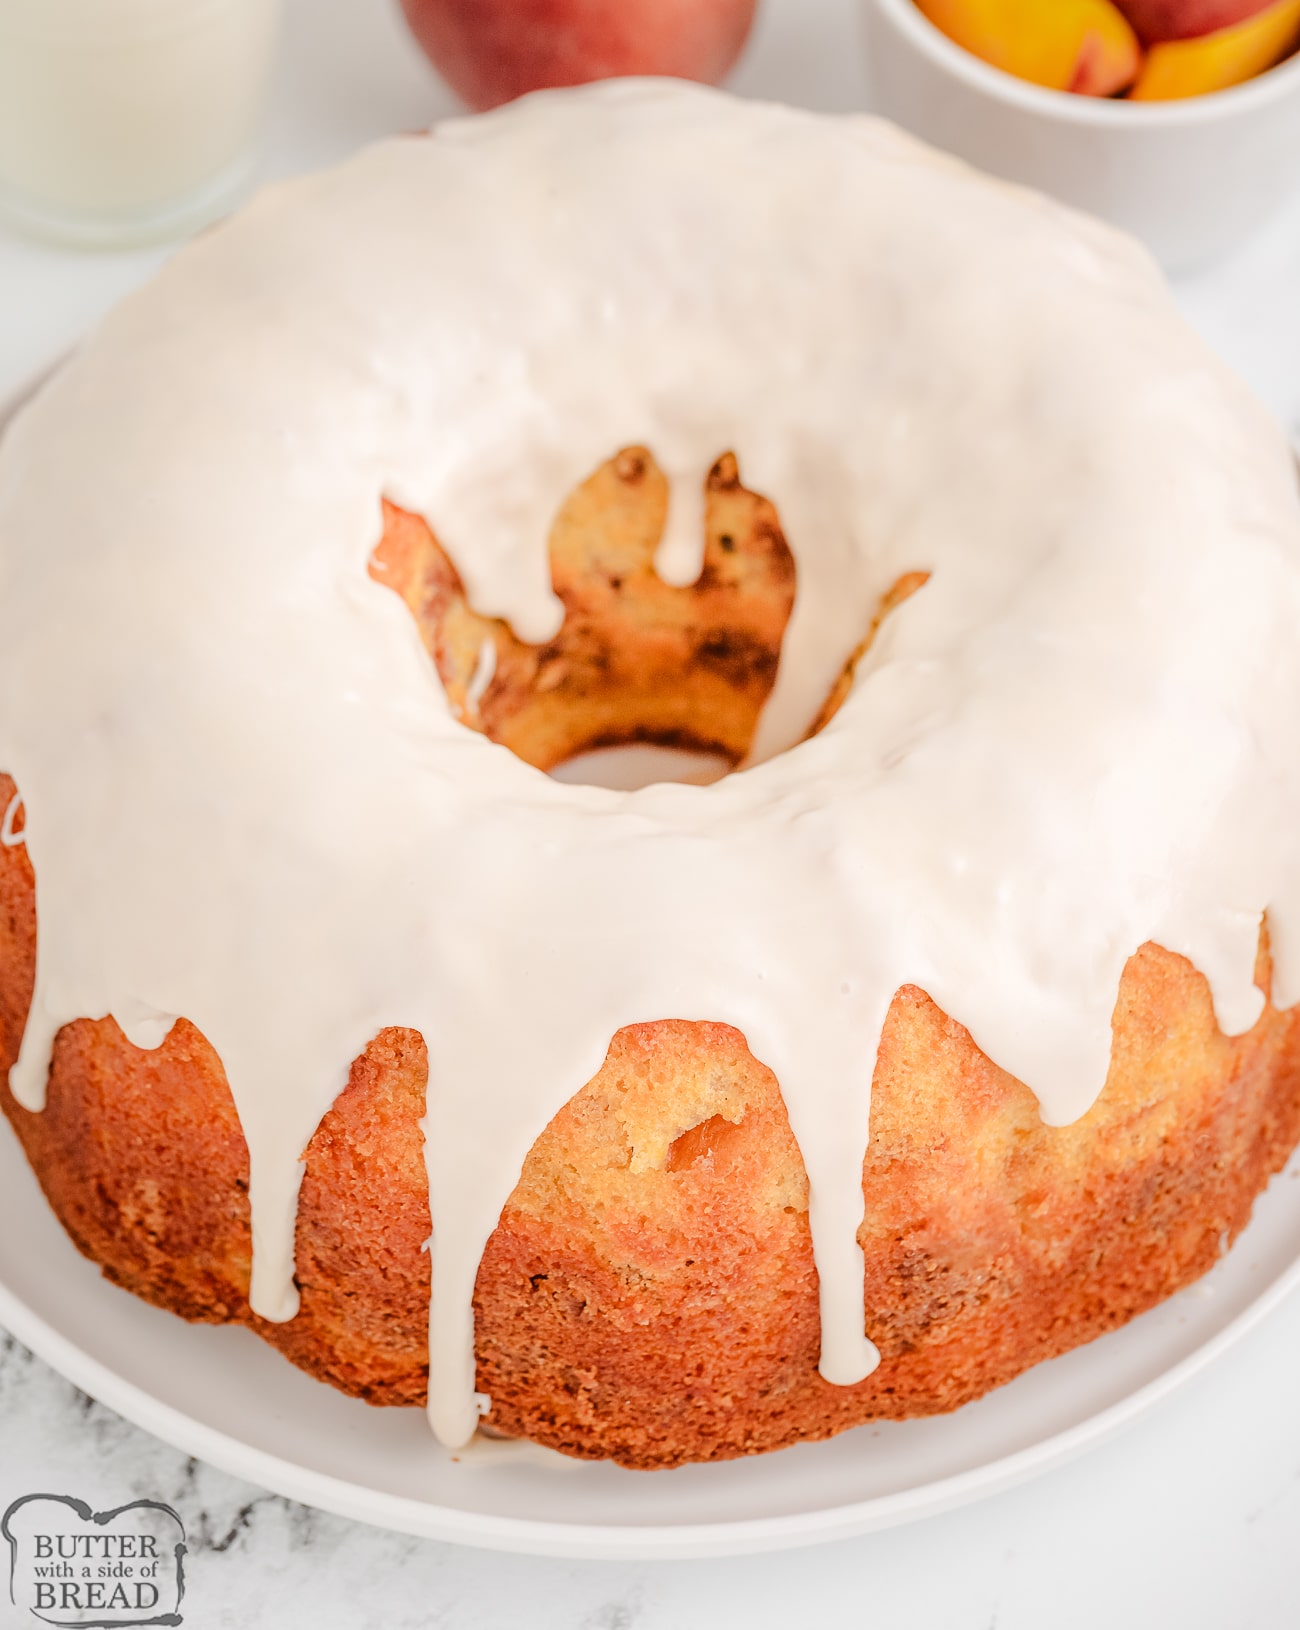 whole peach pound cake with brown sugar crumble baked inside